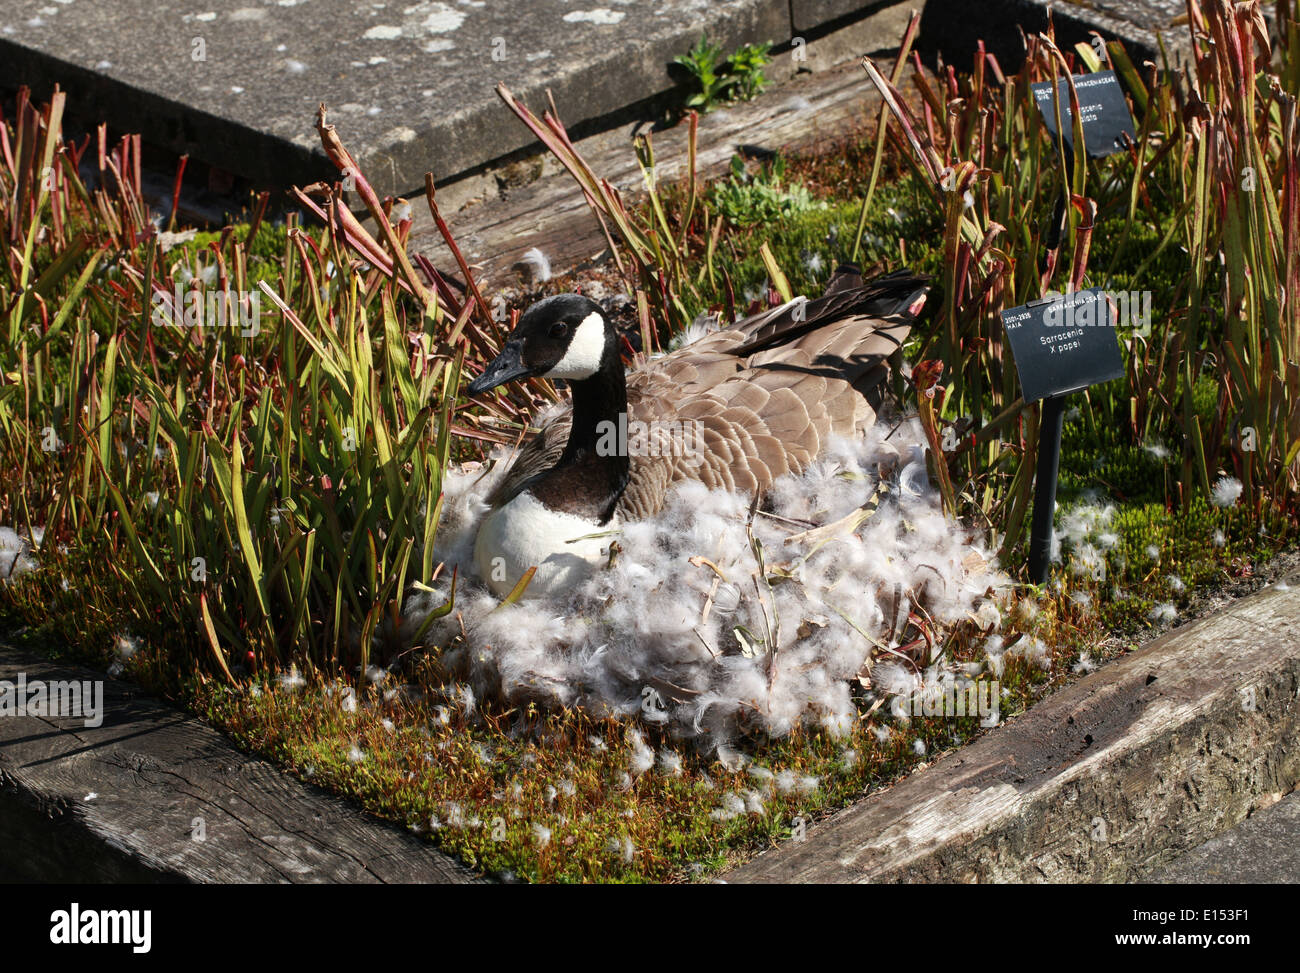 Canada Goose Nesting in a Flower Bed at Kew Gardens. Canada Goose Geese, Branta canadensis, Anatidae. Stock Photo